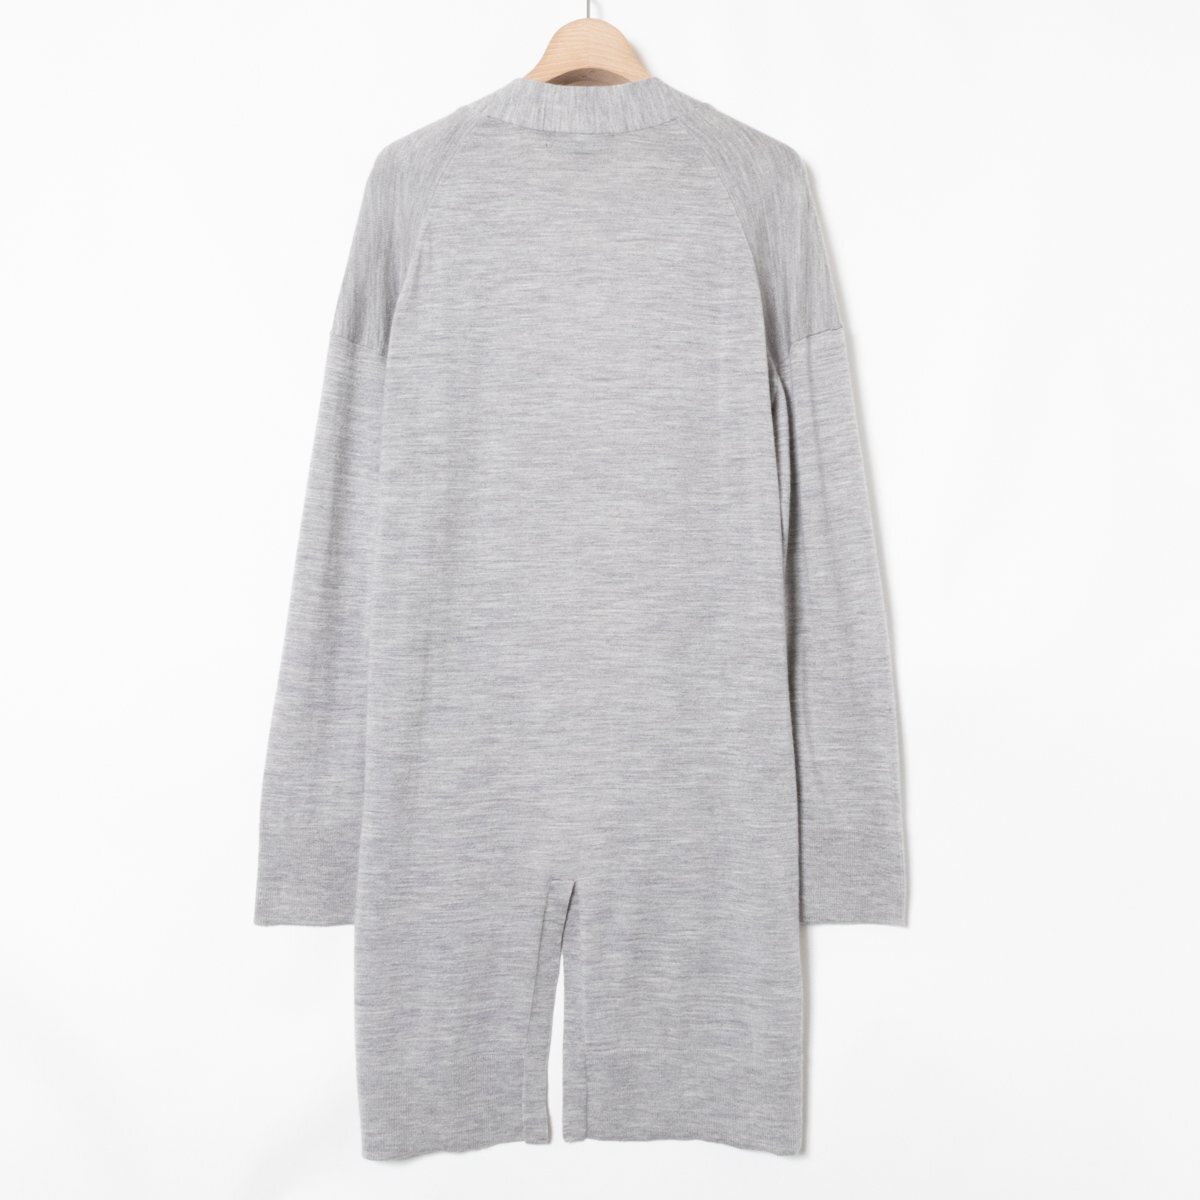 UNTITLED Untitled long knitted cardigan feather woven long sleeve plain no- button 2 wool gray grey beautiful . casual simple woman clothes 